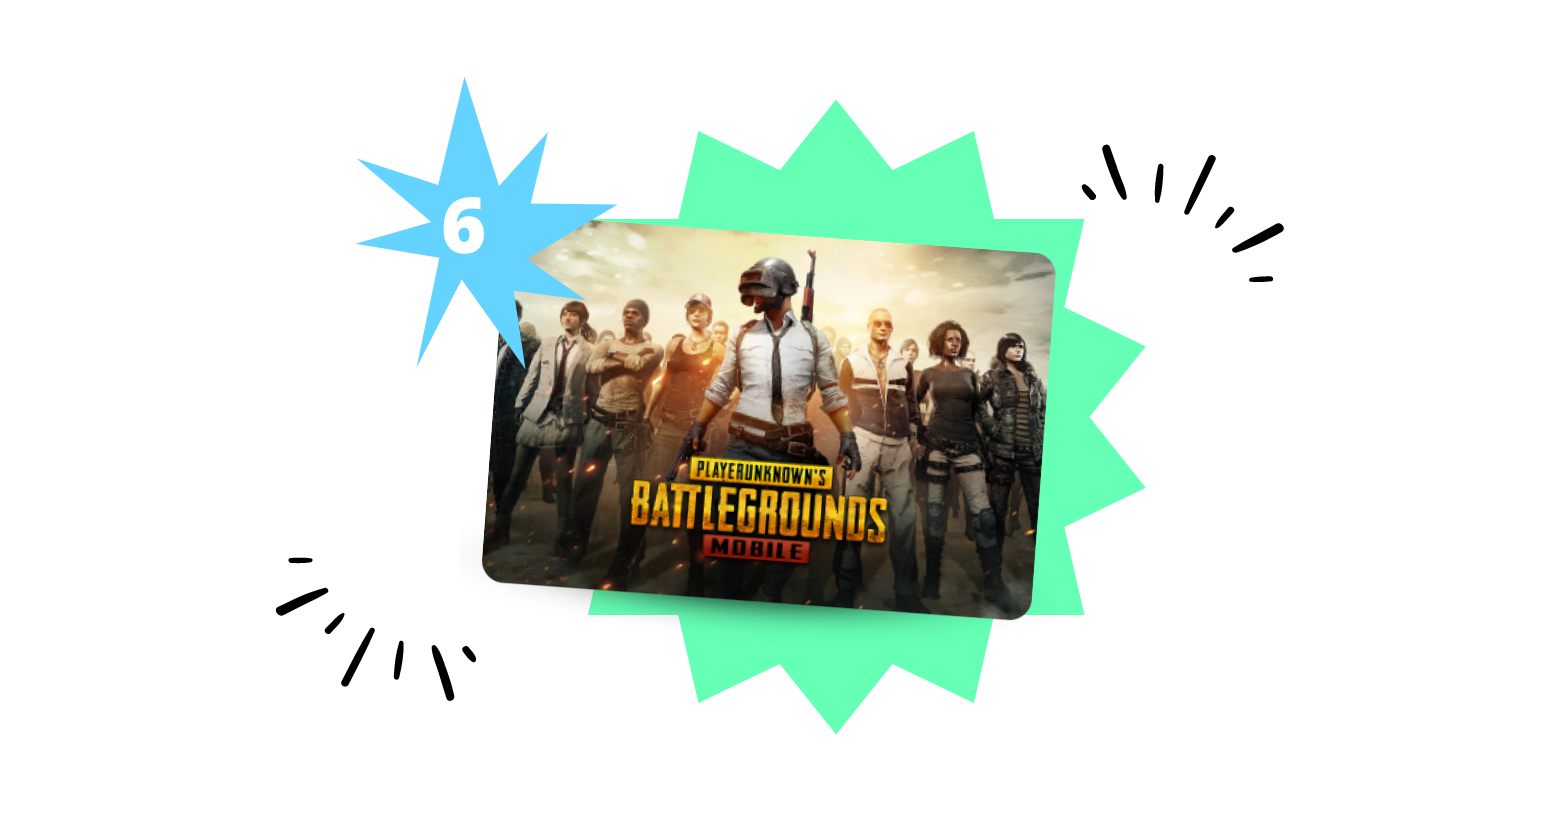 PubG gift card center of image